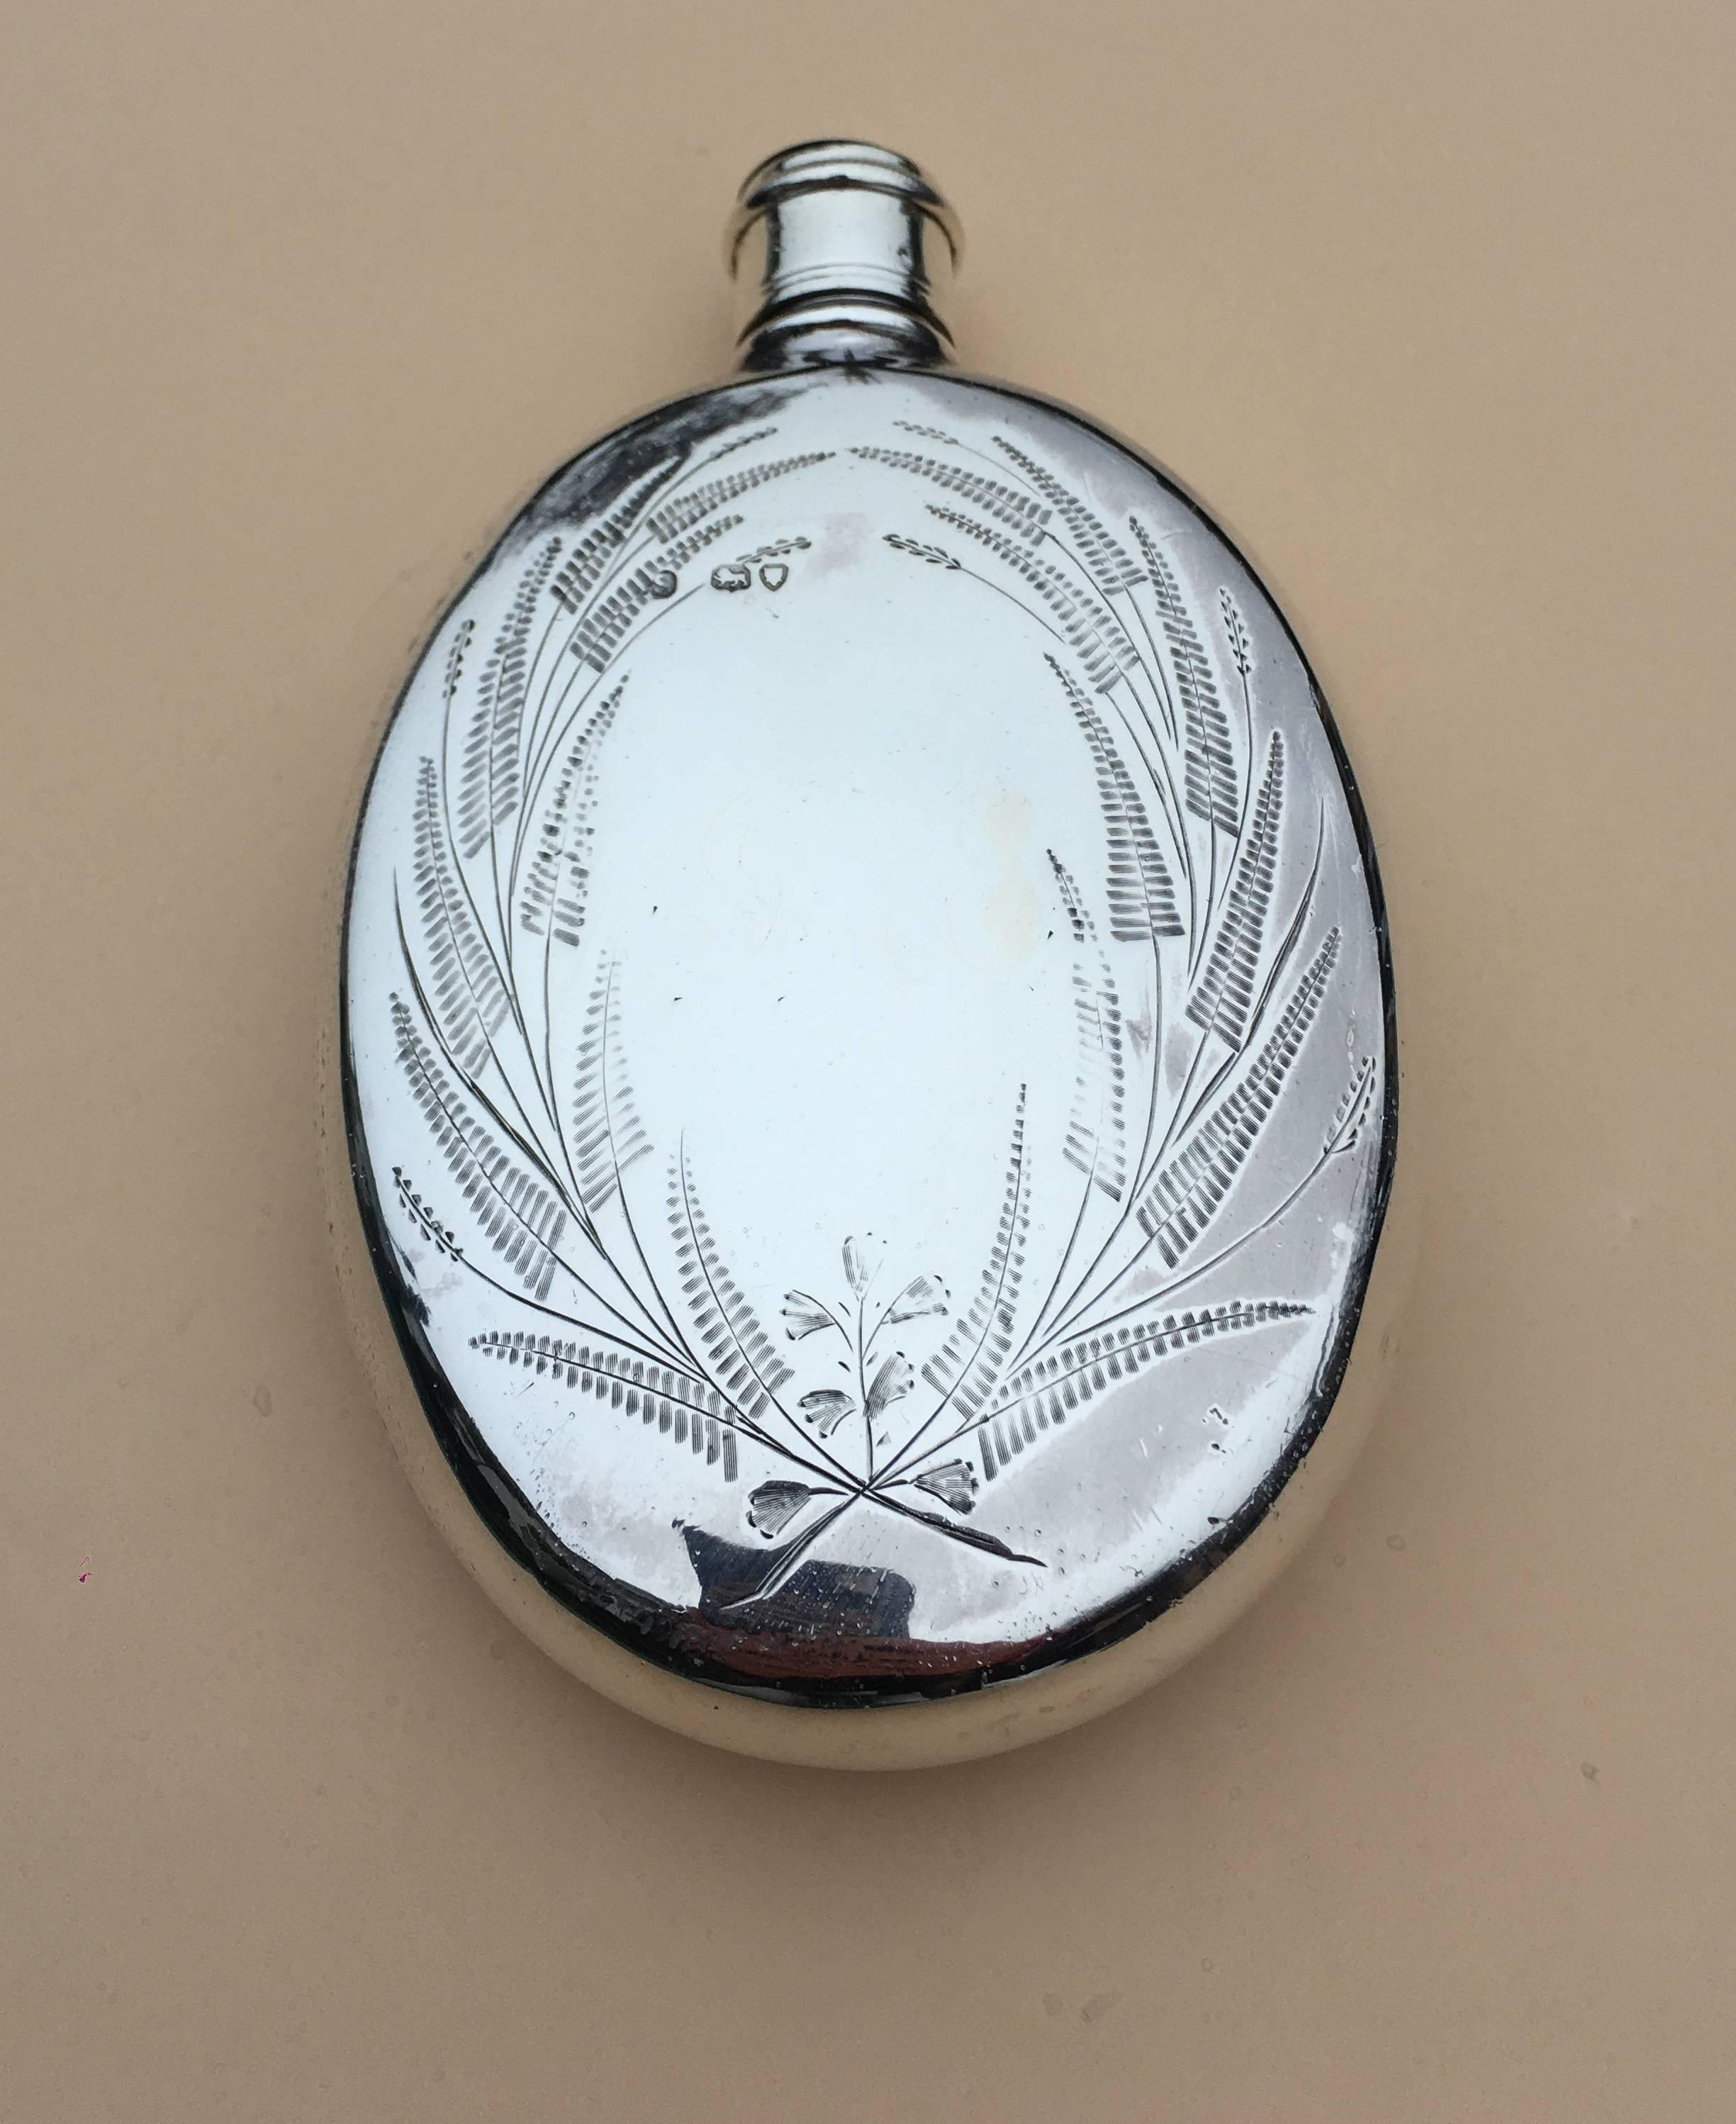 Arts and Crafts Aesthetic Movement silver hip or pocket flask, 1871

A charming piece the flask has an Oval shape, making it ideal to keep in either a breast or hip pocket, 0r dare I say handbag, both sides of the flask are engraved with stylized